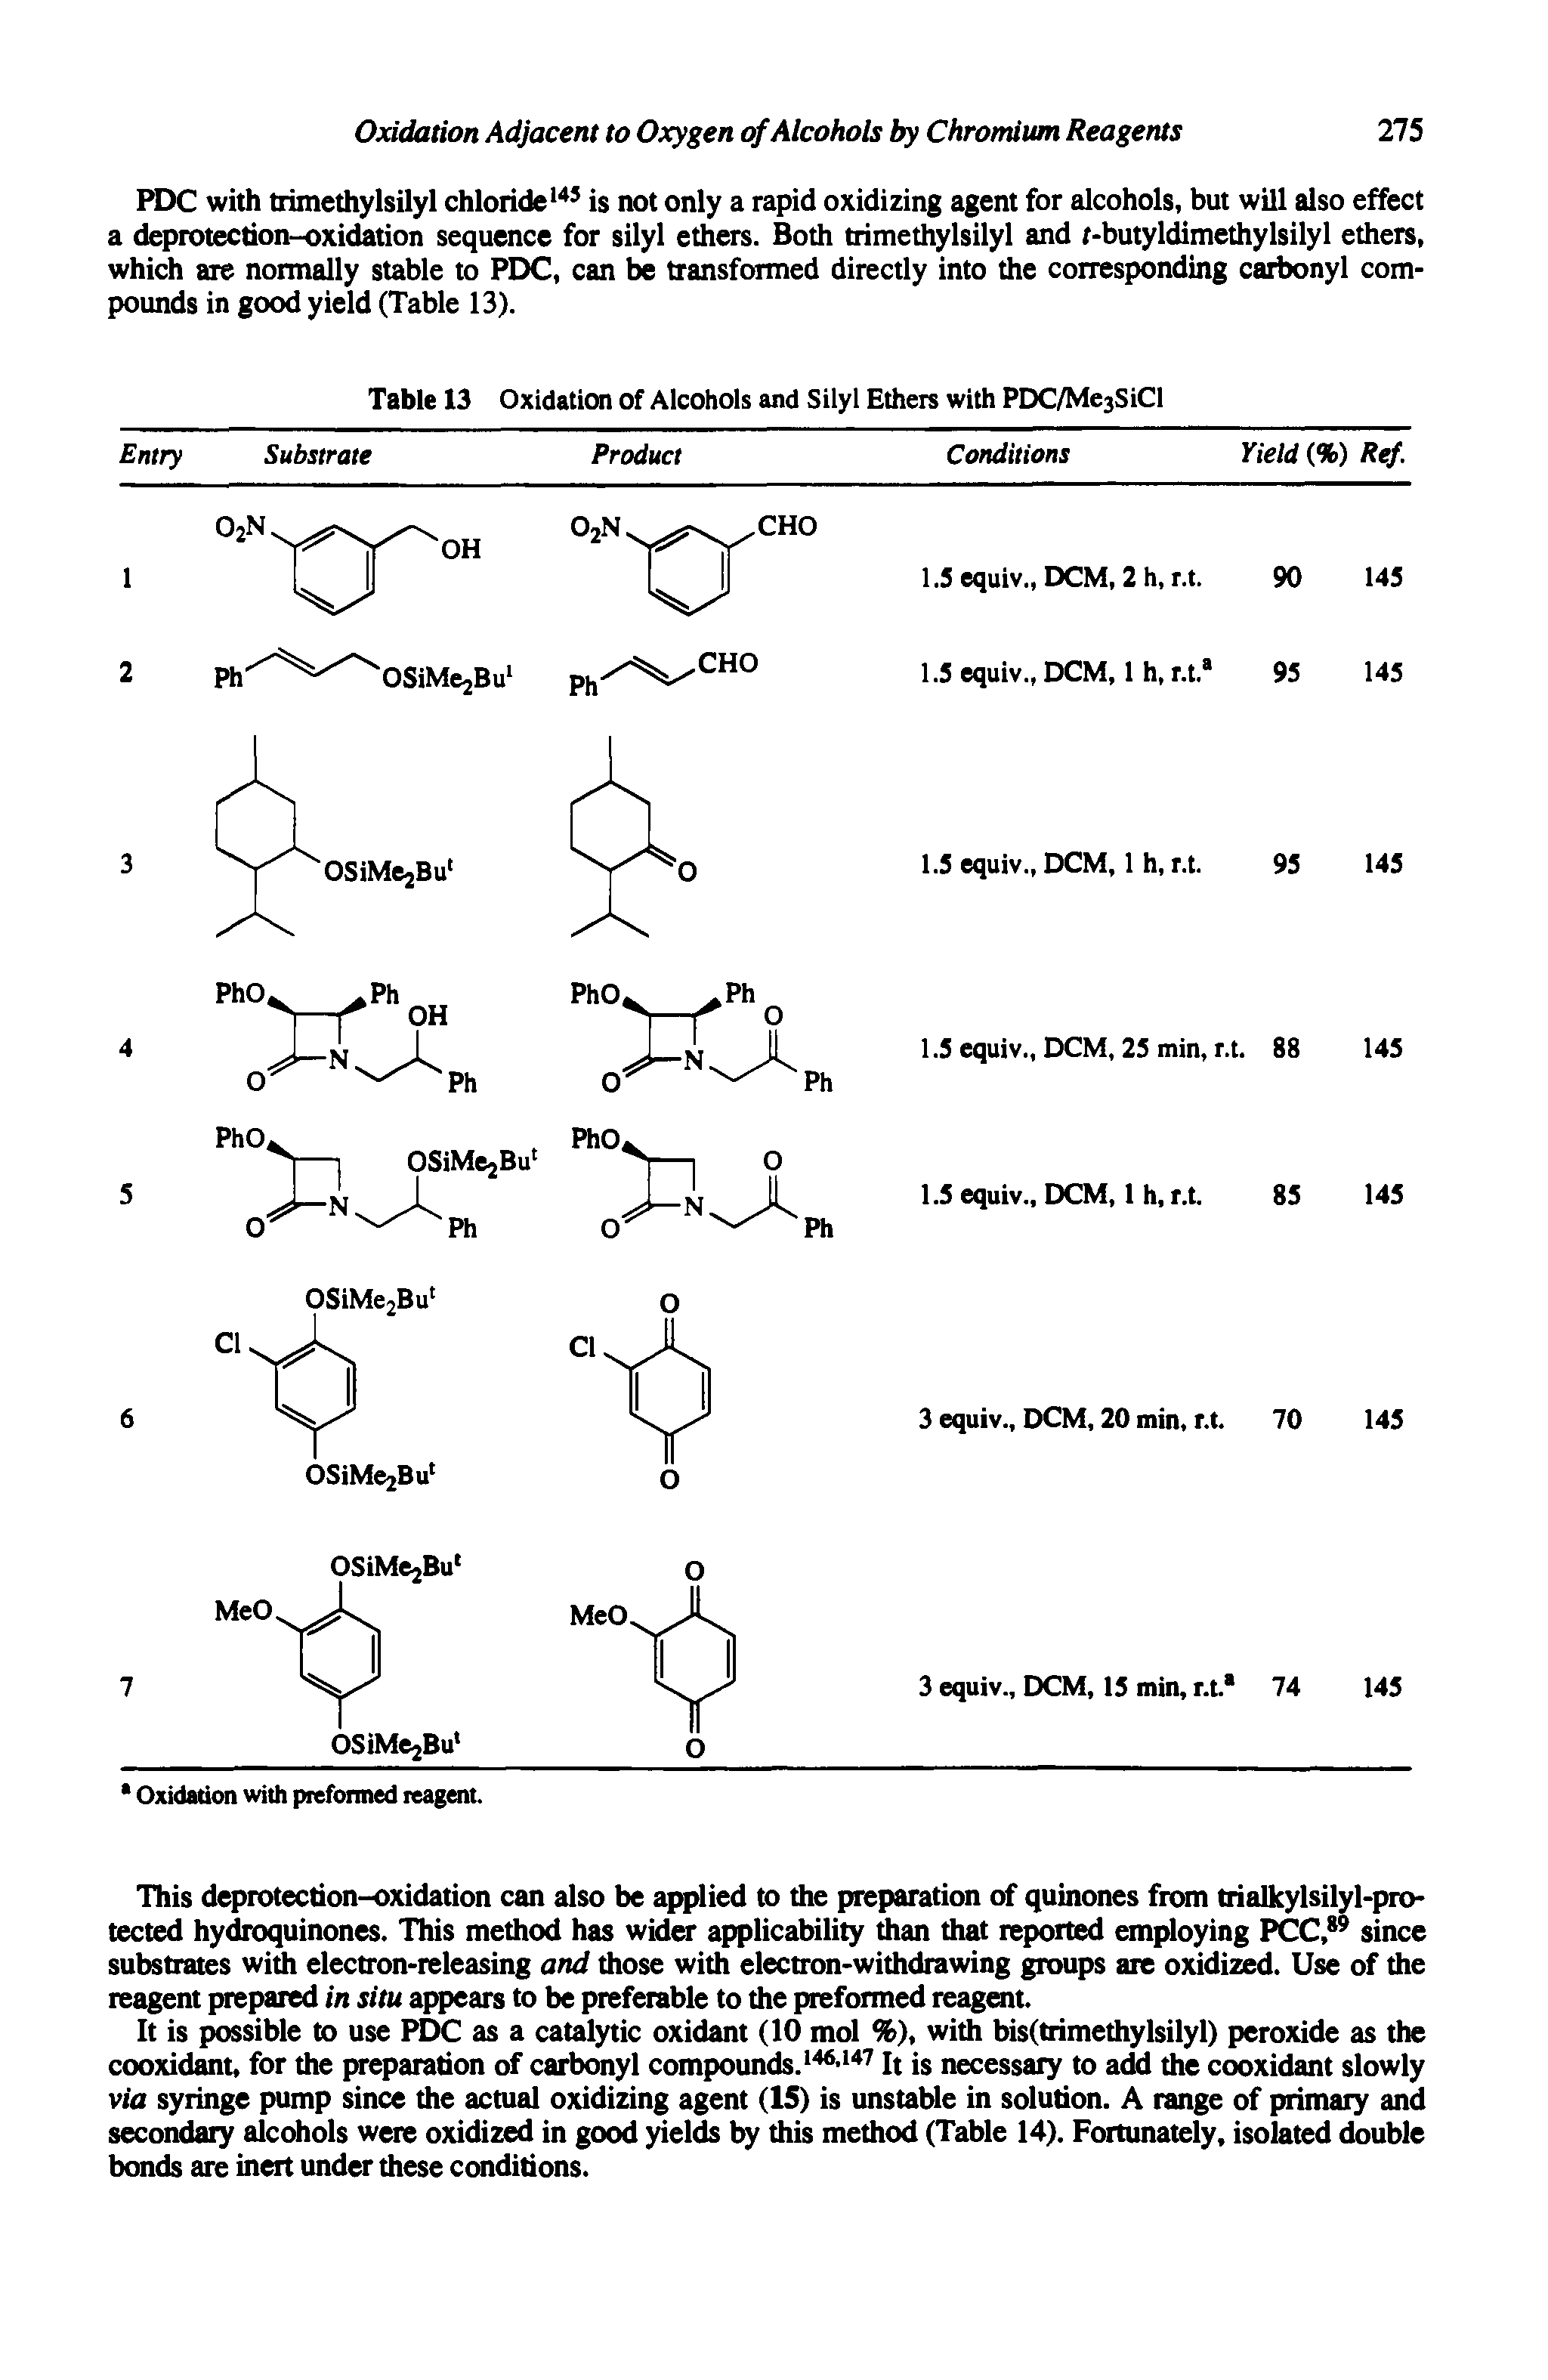 Table 13 Oxidation of Alcohols and Silyl Ethers with PDC/Me3SiCI...